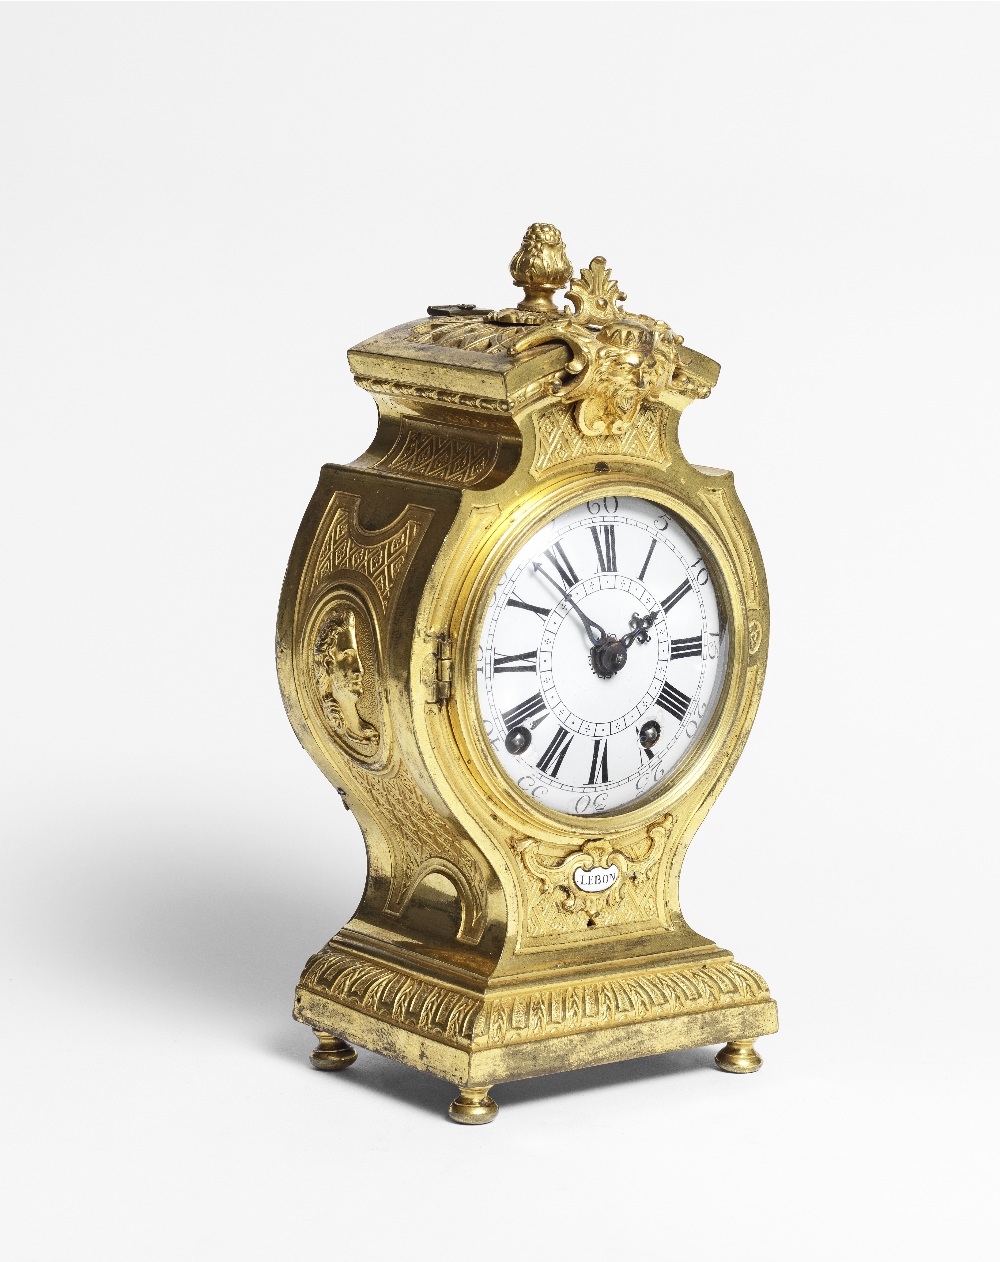 An exceptionally rare and very fine early 18th century French ormolu travelling clock with choice... - Image 5 of 5